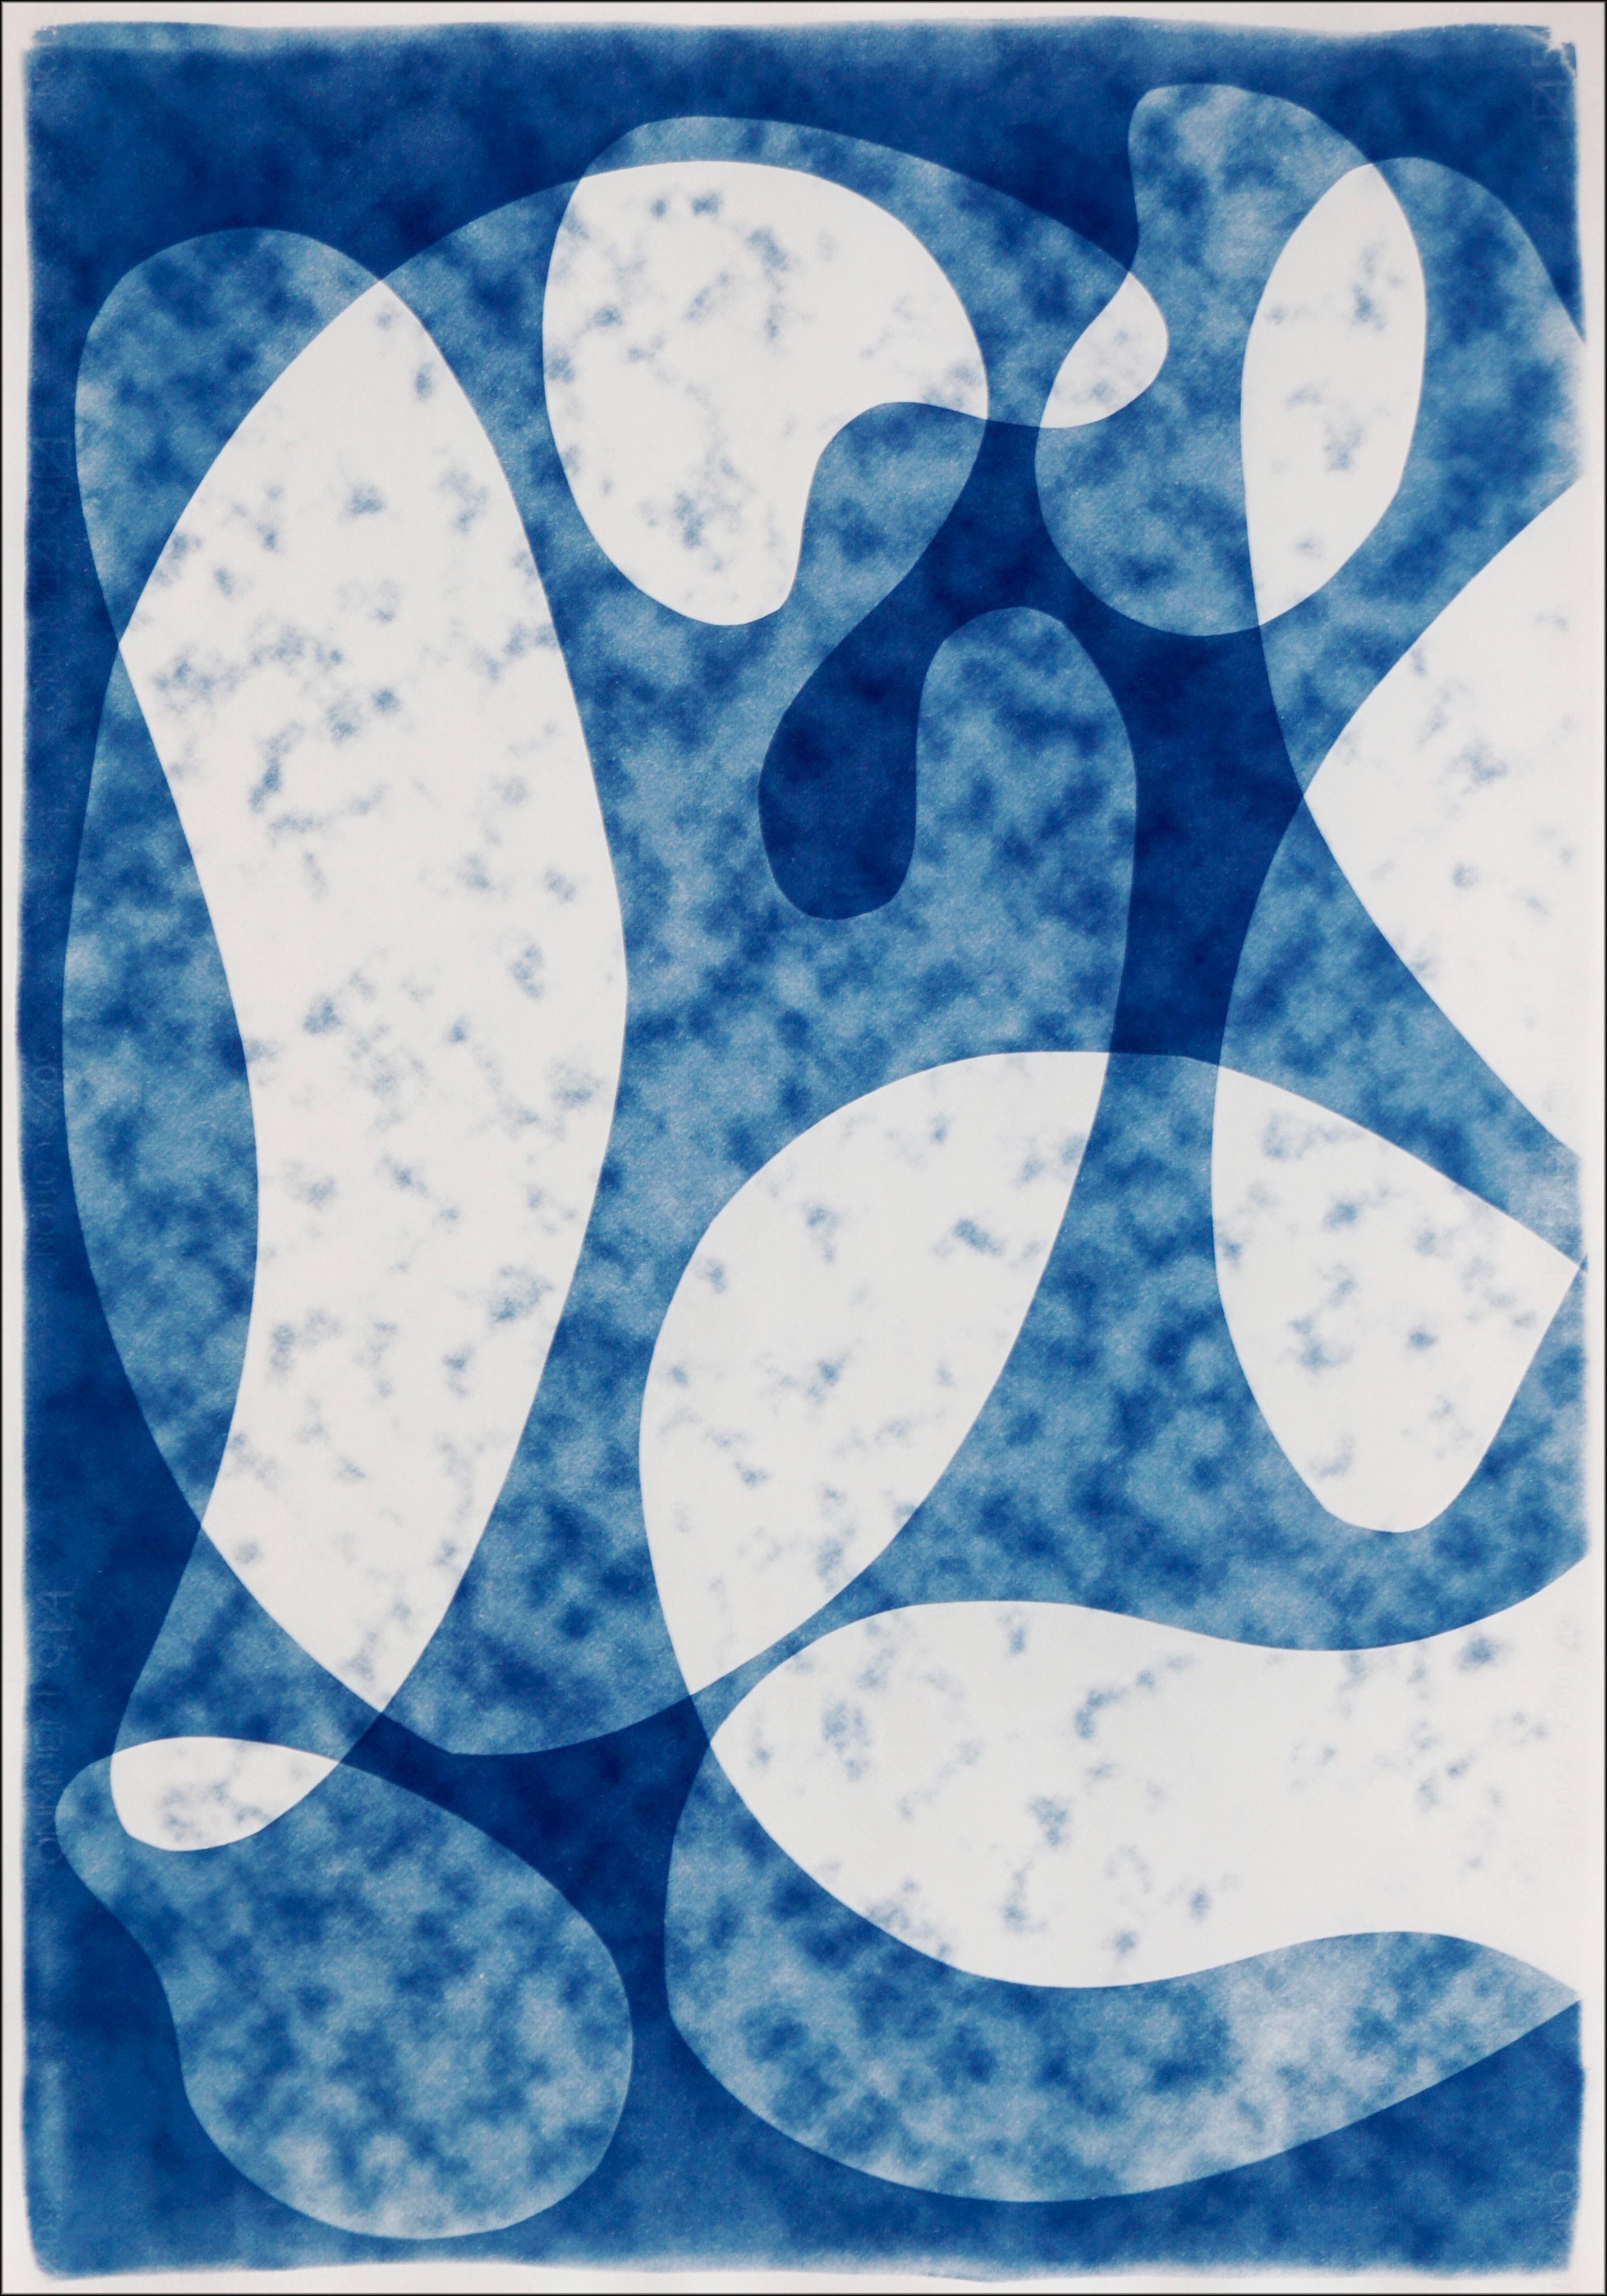 This is an exclusive handprinted unique cyanotype that takes its inspiration from the mid-century modern shapes.
It's made by layering paper cutouts and different exposures using uv-light. 

Details:
+ Title: Modernism in The Clouds
+ Year: 2023
+